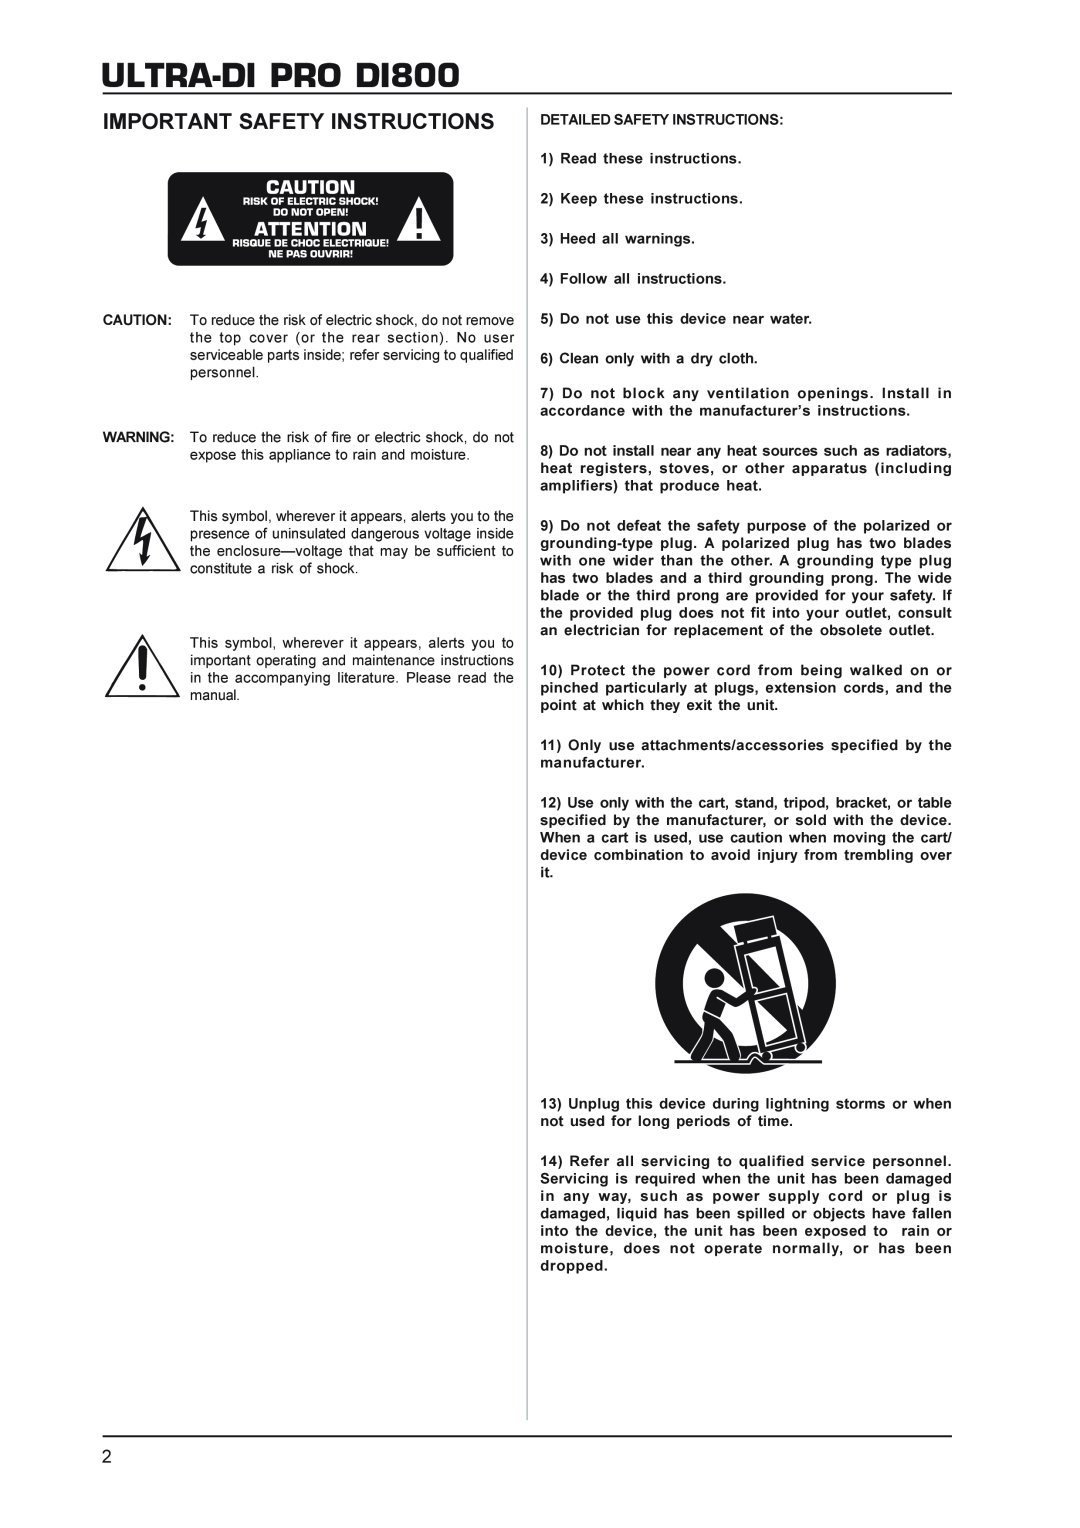 Behringer manual ULTRA-DIPRO DI800, Important Safety Instructions 